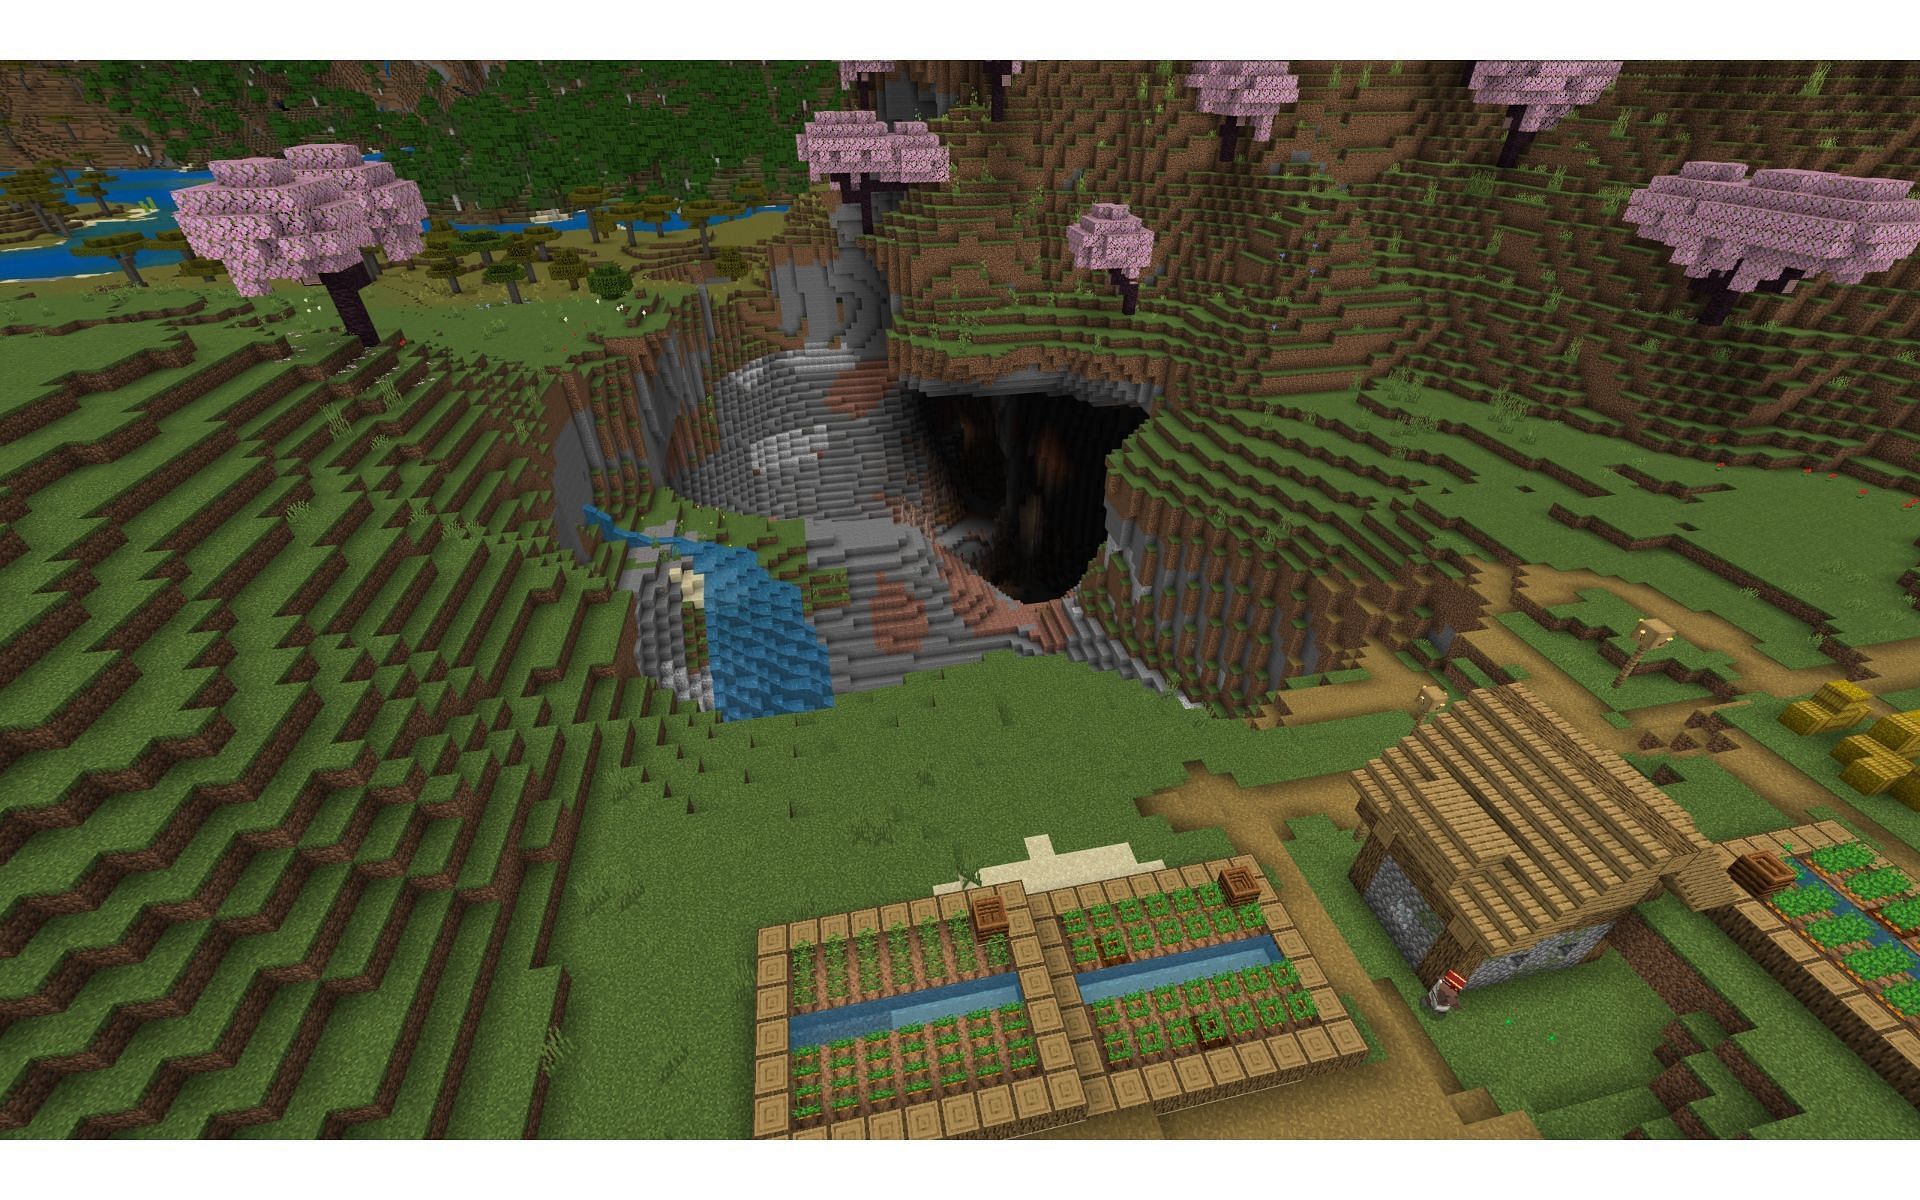 Players can explore this seed to find its secrets (Image via Mojang)